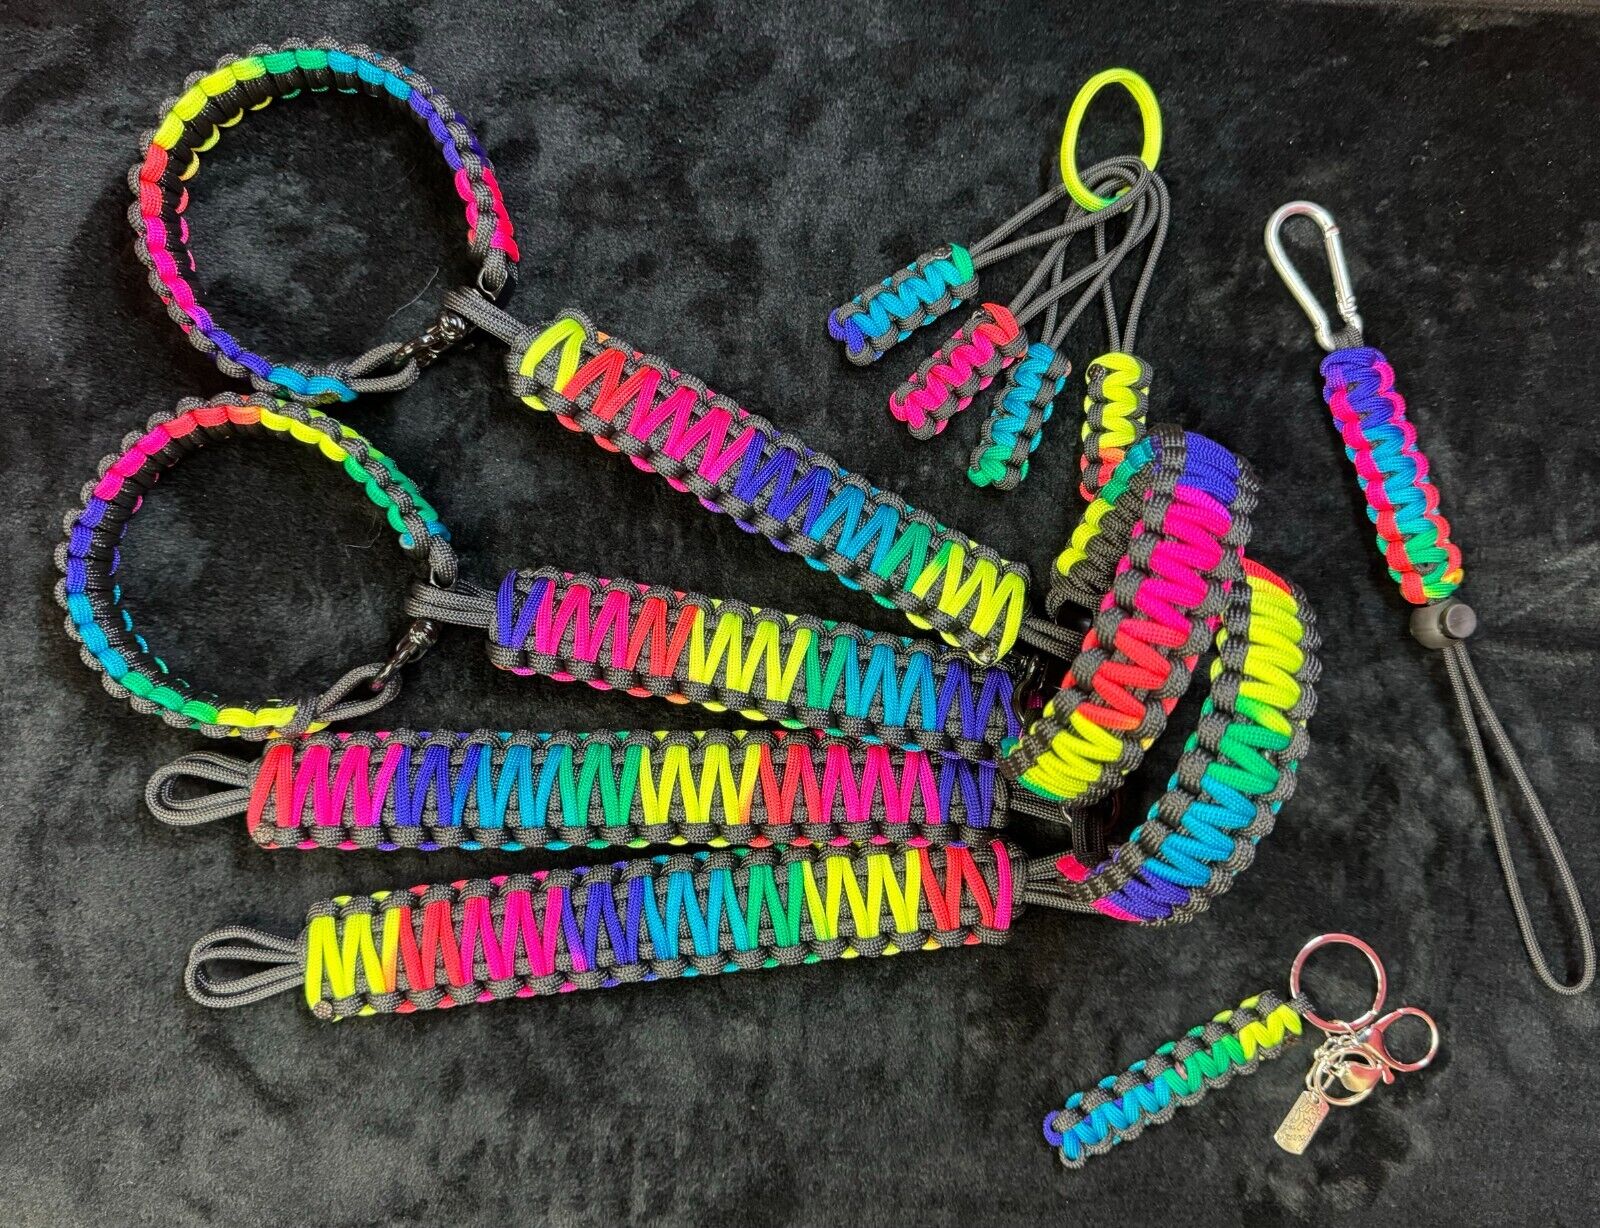 Bright Rainbow and Black 550 Paracord Grab Handles for a Wrangler 4x4 SxS